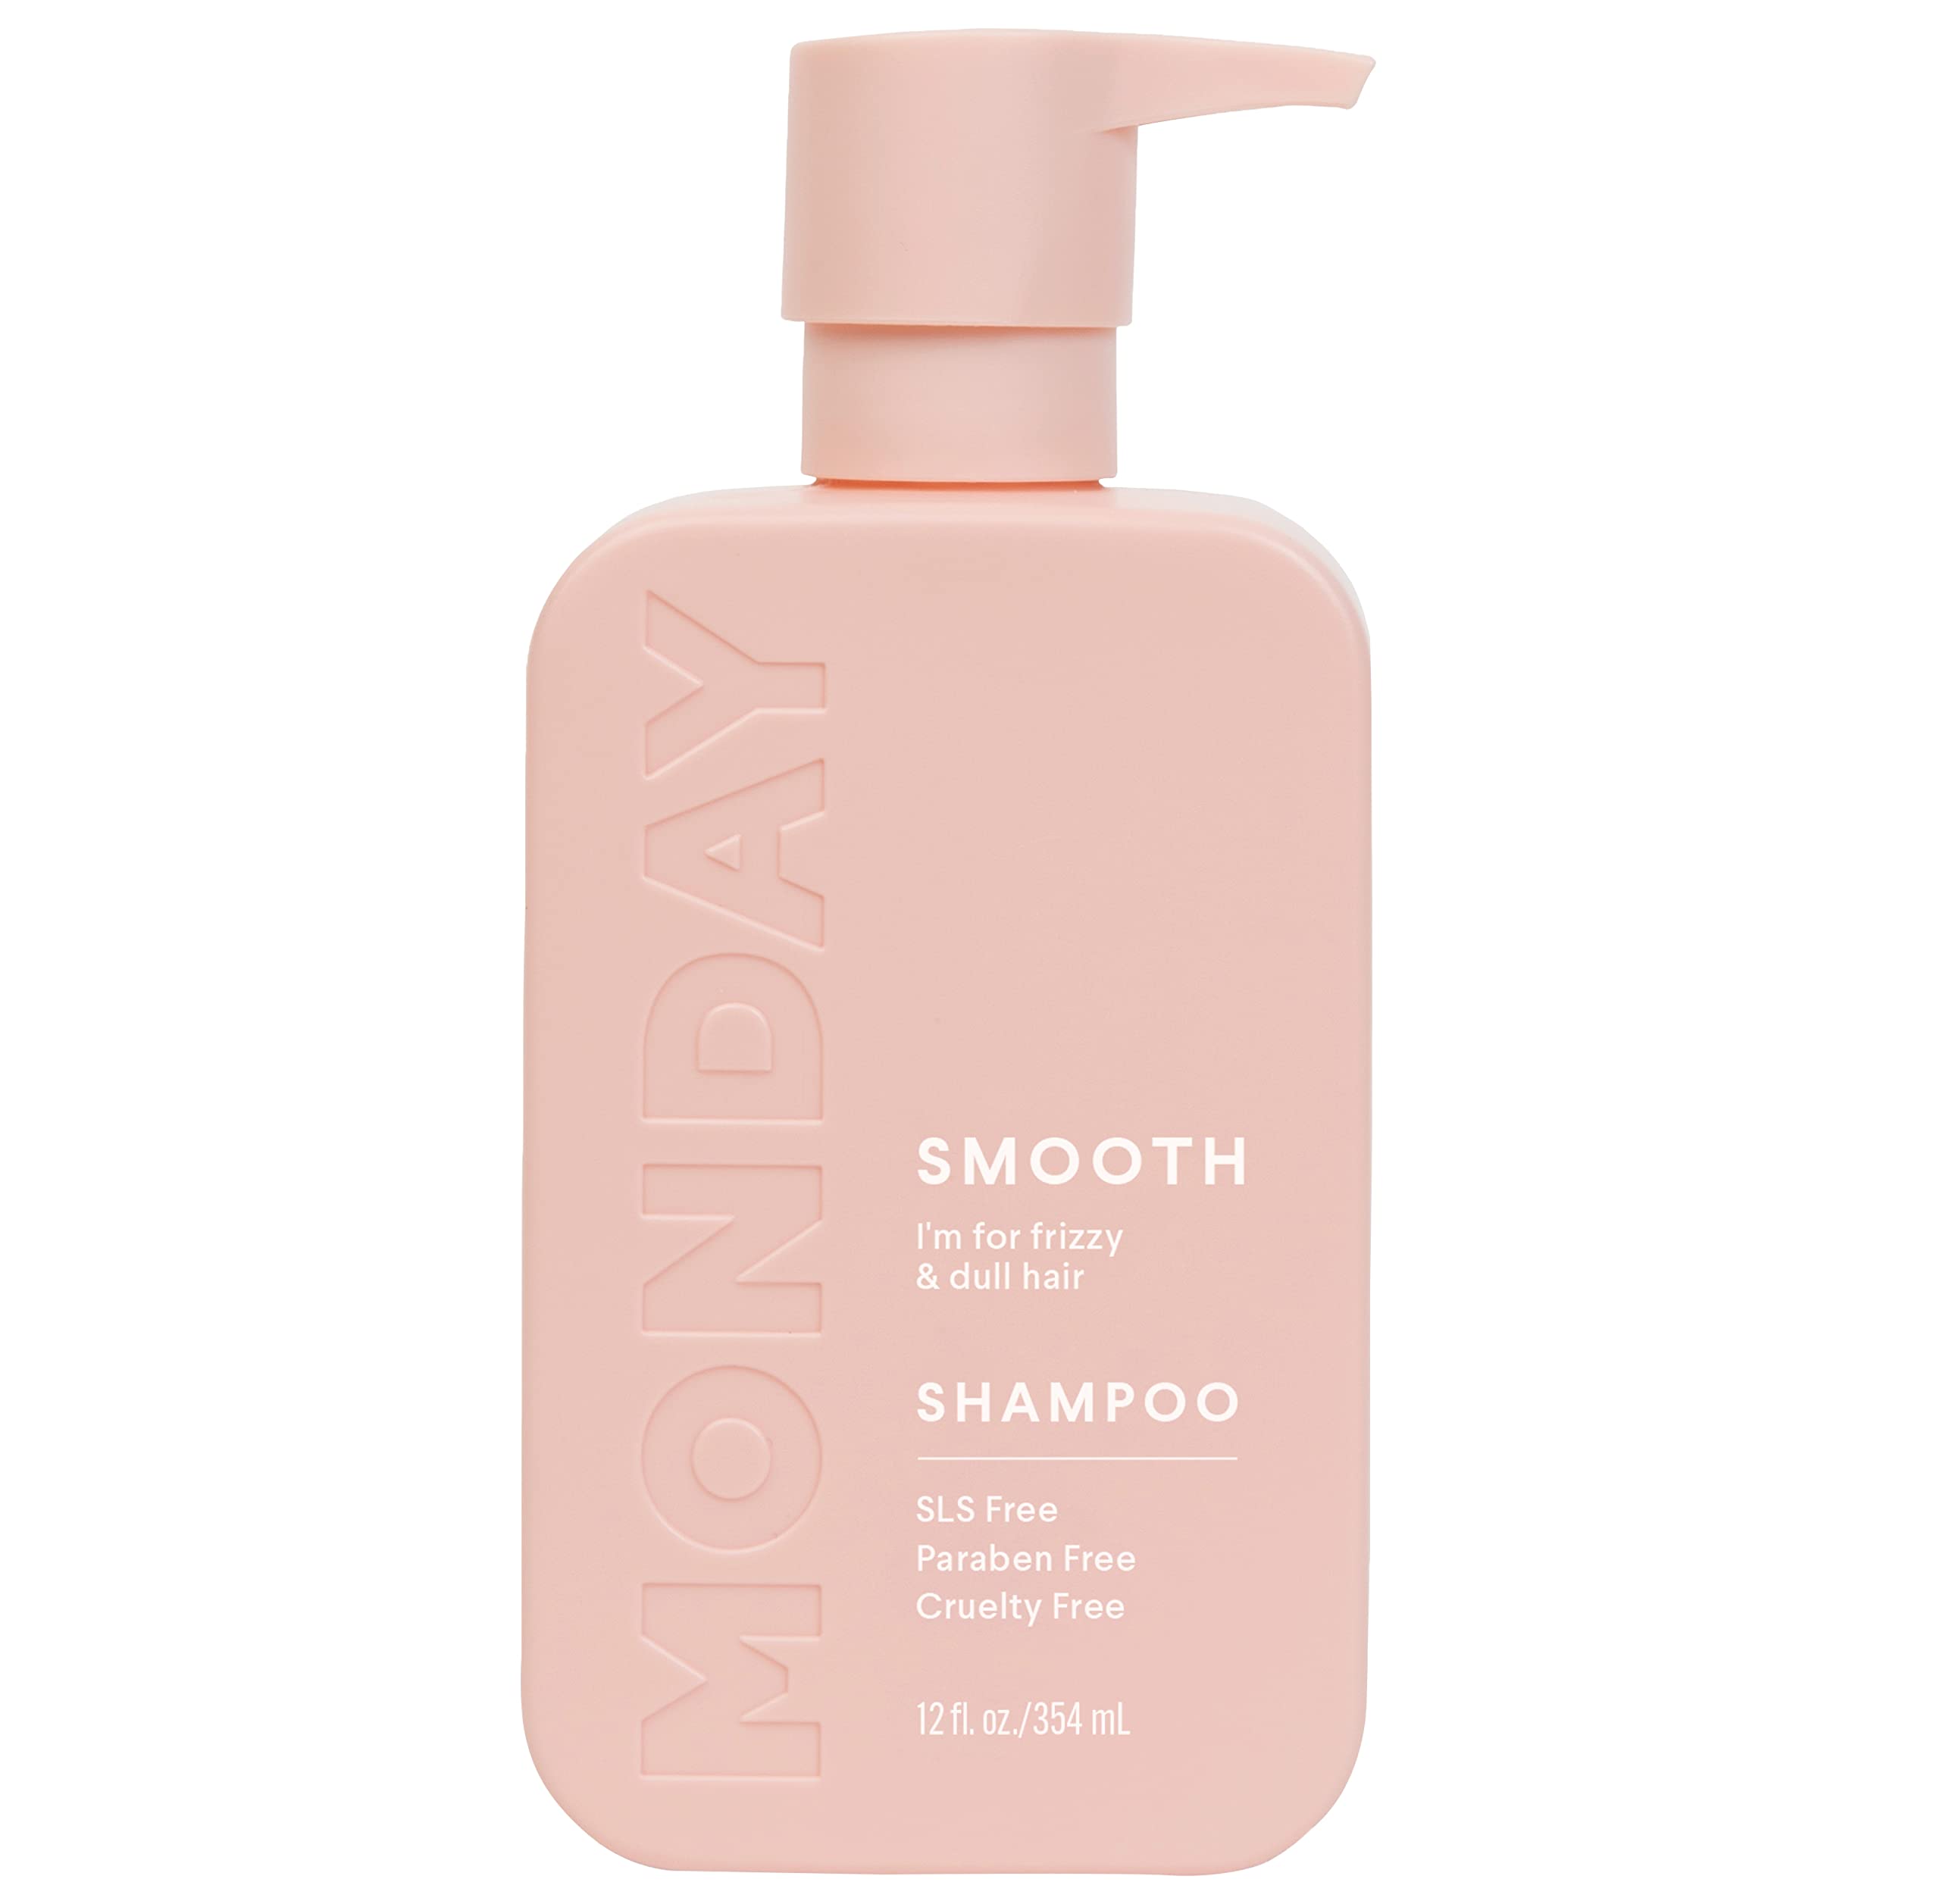 MONDAY HAIRCARE Smooth Shampoo 12oz for Frizzy, Coarse, and Curly Hair, Made from Coconut Oil, Shea Butter, & Vitamin E, 100% Recyclable Bottles (350ml)